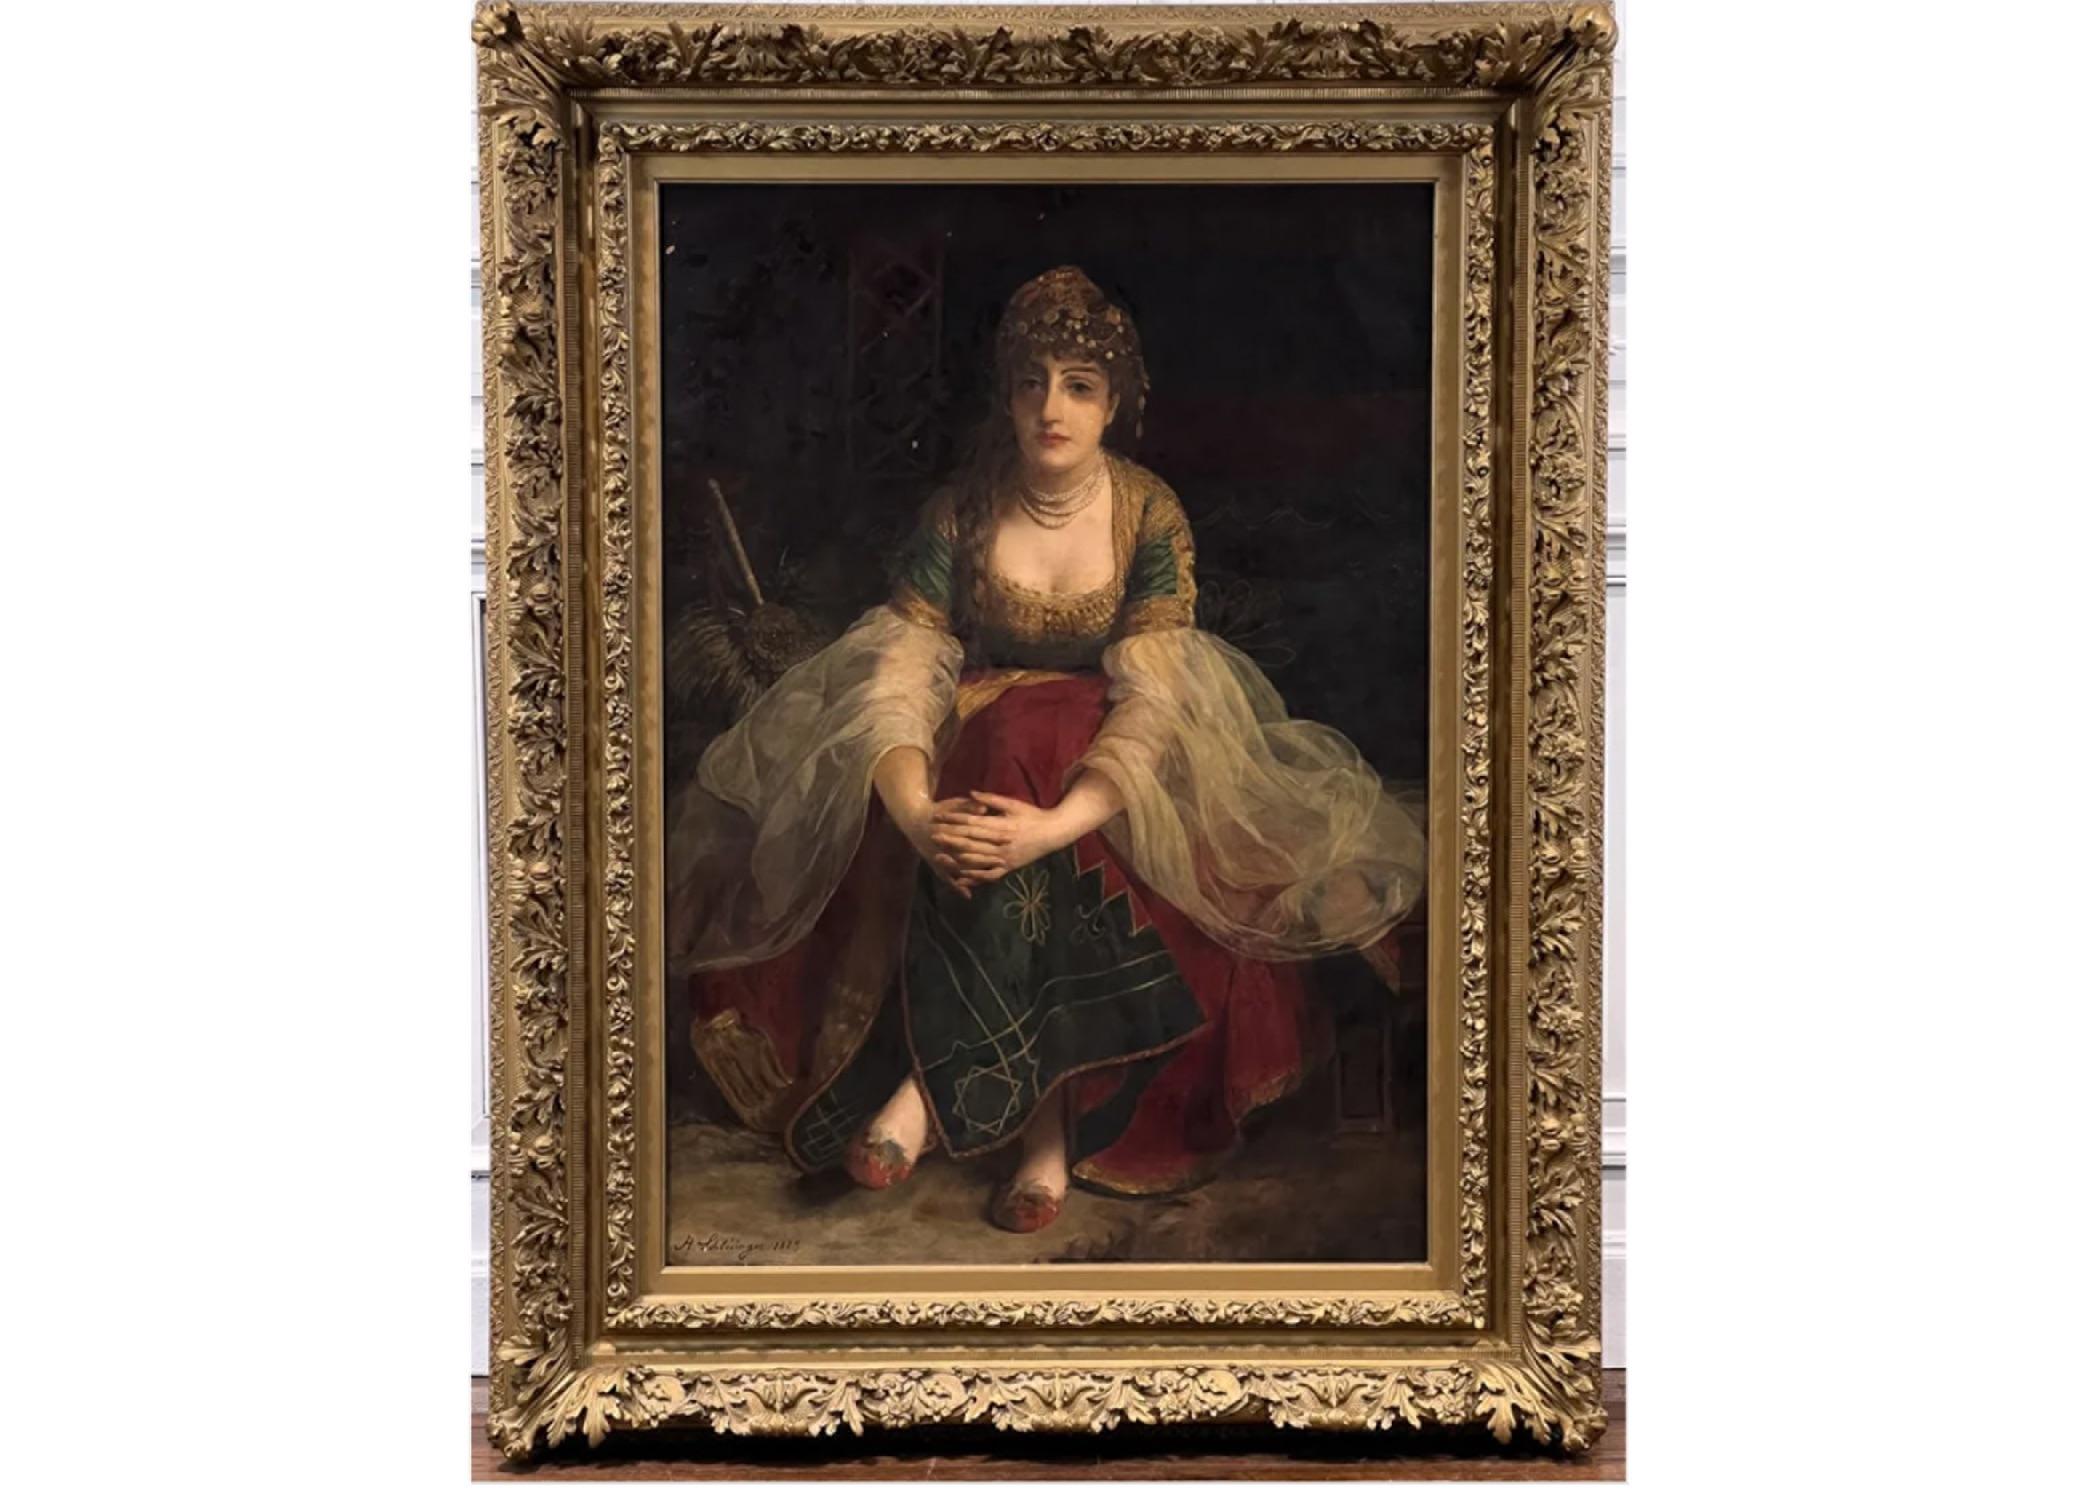 Portrait Of A Harem Beauty, Oil In Canvas, Signed And Dated 1885 Lower Left. 54 X 38 Inches, Period Frame 70 X 54 X 5 Inches. 